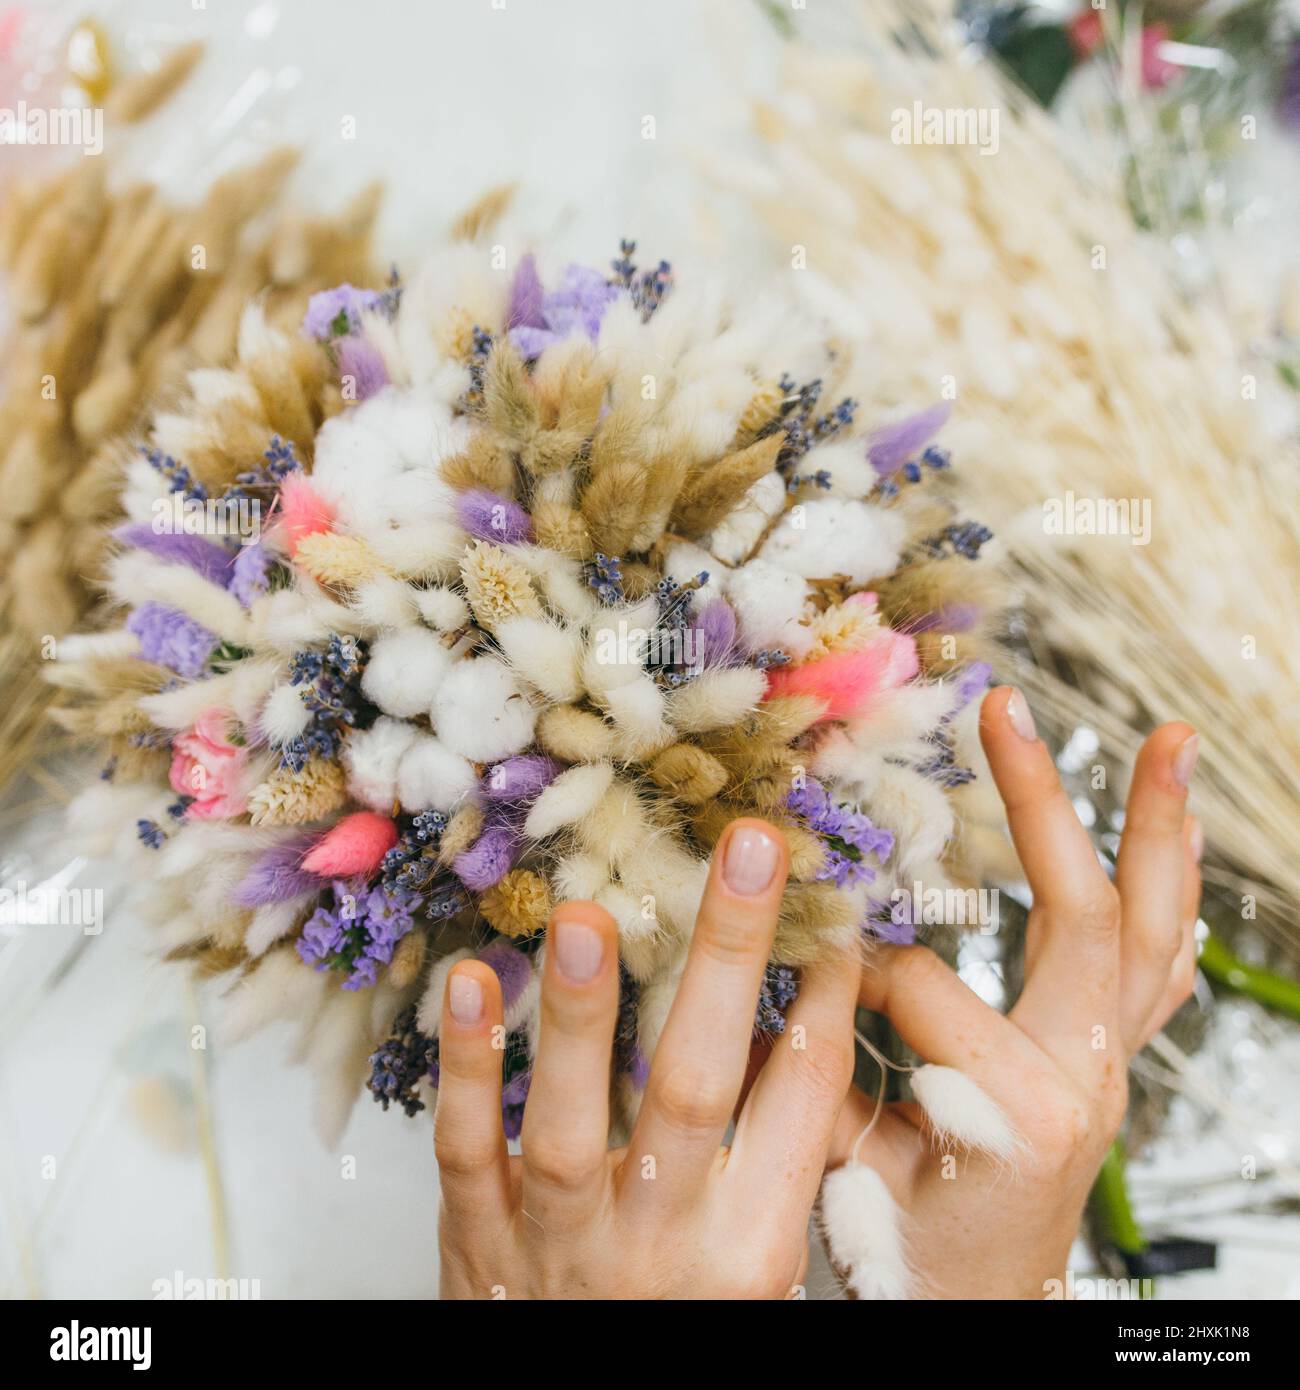 Colorful bouquet of different dried flowers deadwood flowers in the hands of a florist woman. Rustic flower background. Craft bouquet of flowers. The Stock Photo